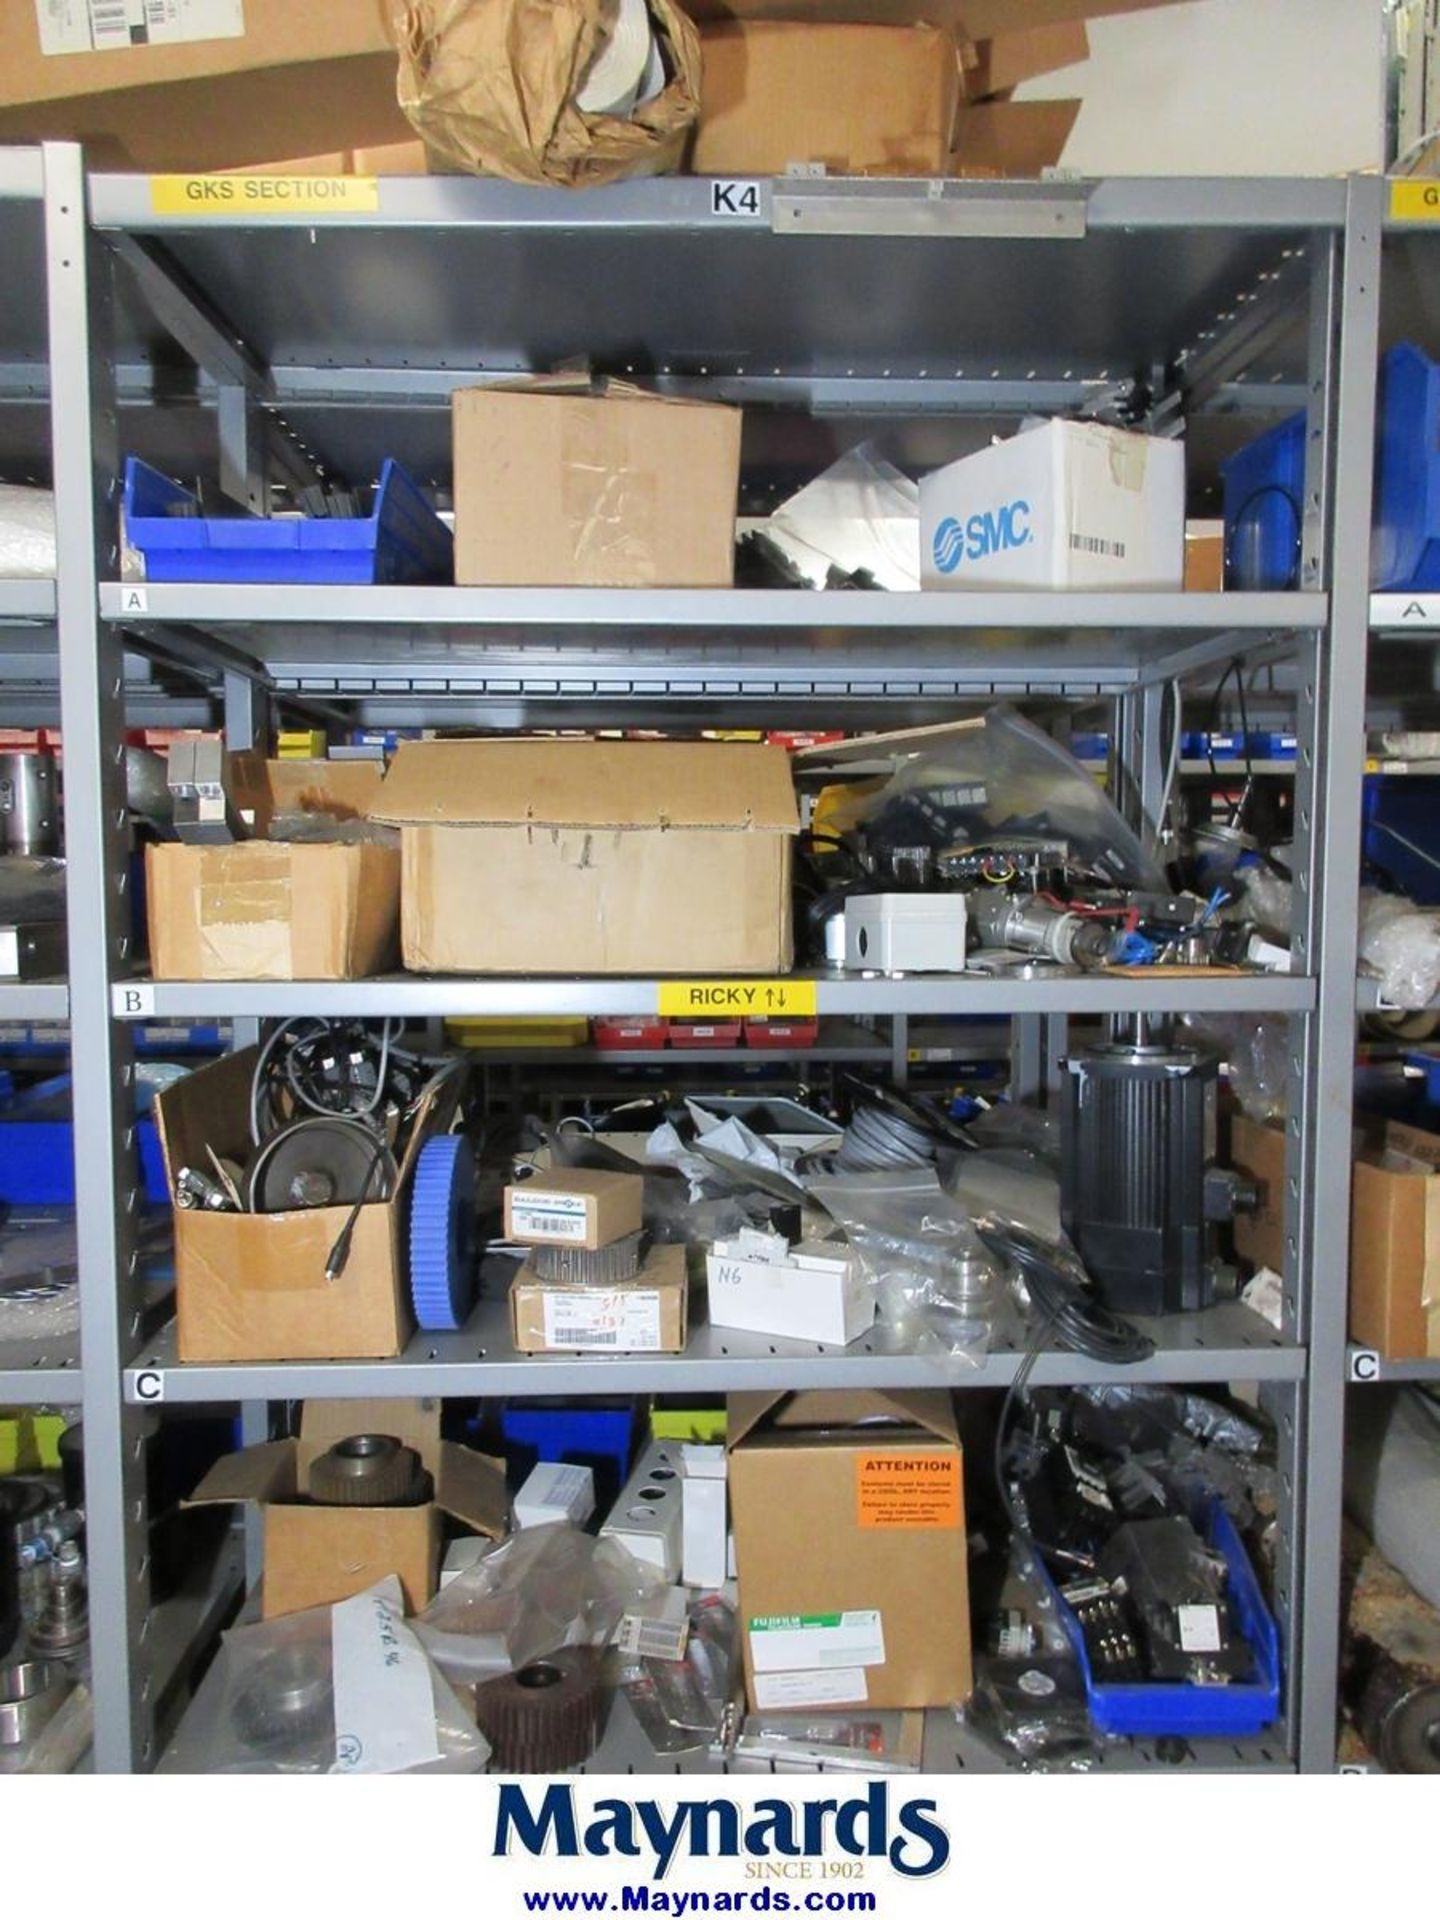 Large Lot of Electrical Controls, PLC's, Drives & Remaining Contents of Maint. Parts Crib - Image 10 of 107